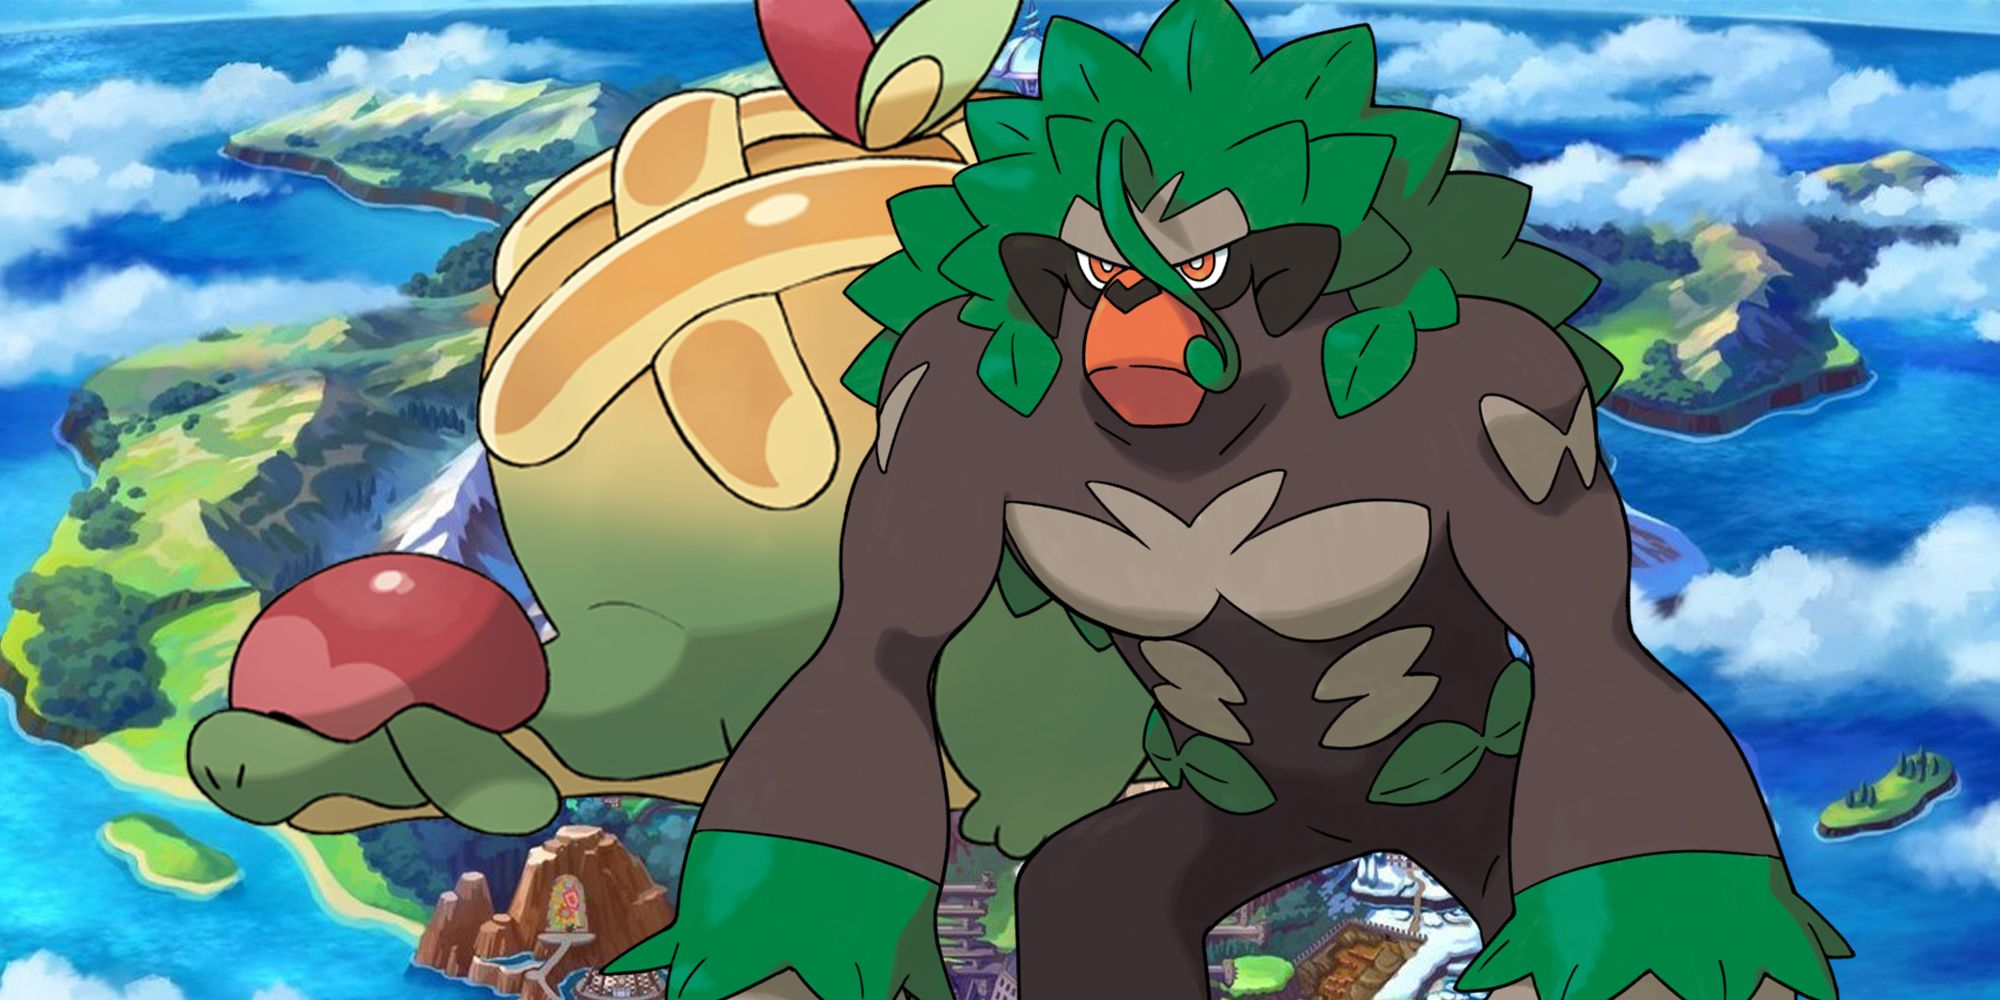 Two Grass type Pokemon from Pokemon Sword and Shield above a map of the region